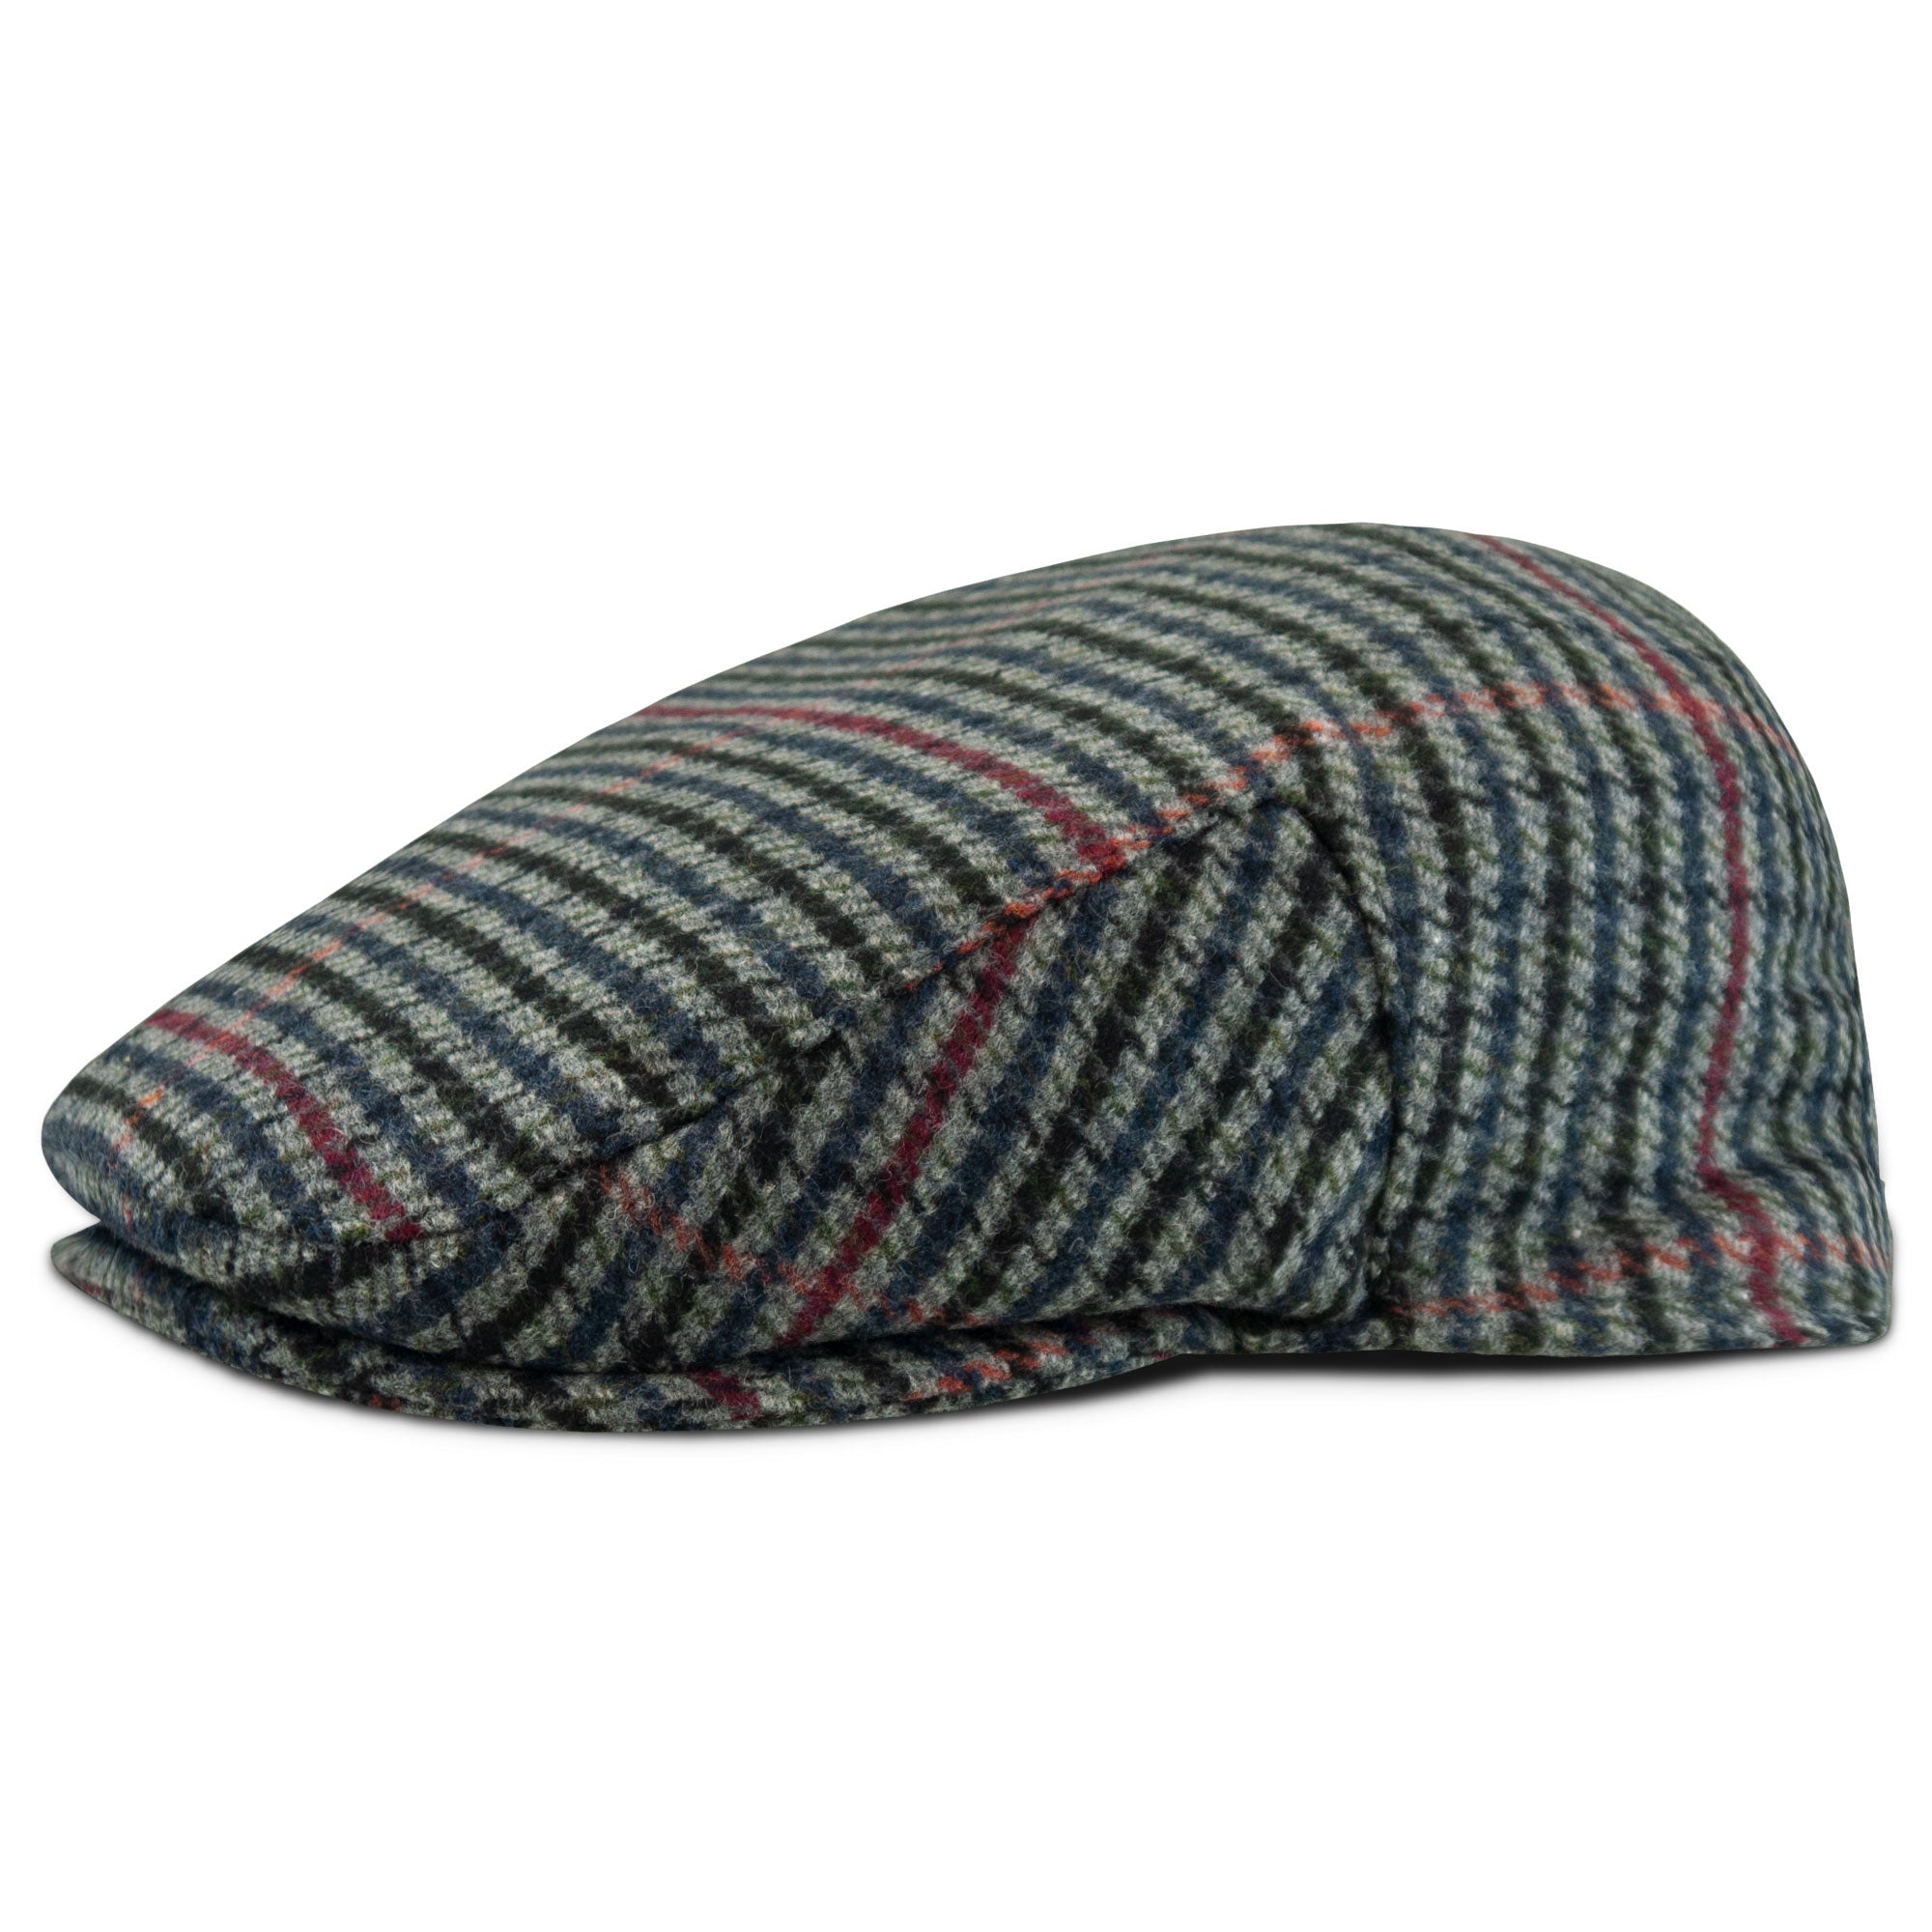 Barbour New County Flat Cap - Assorted Tweed Check